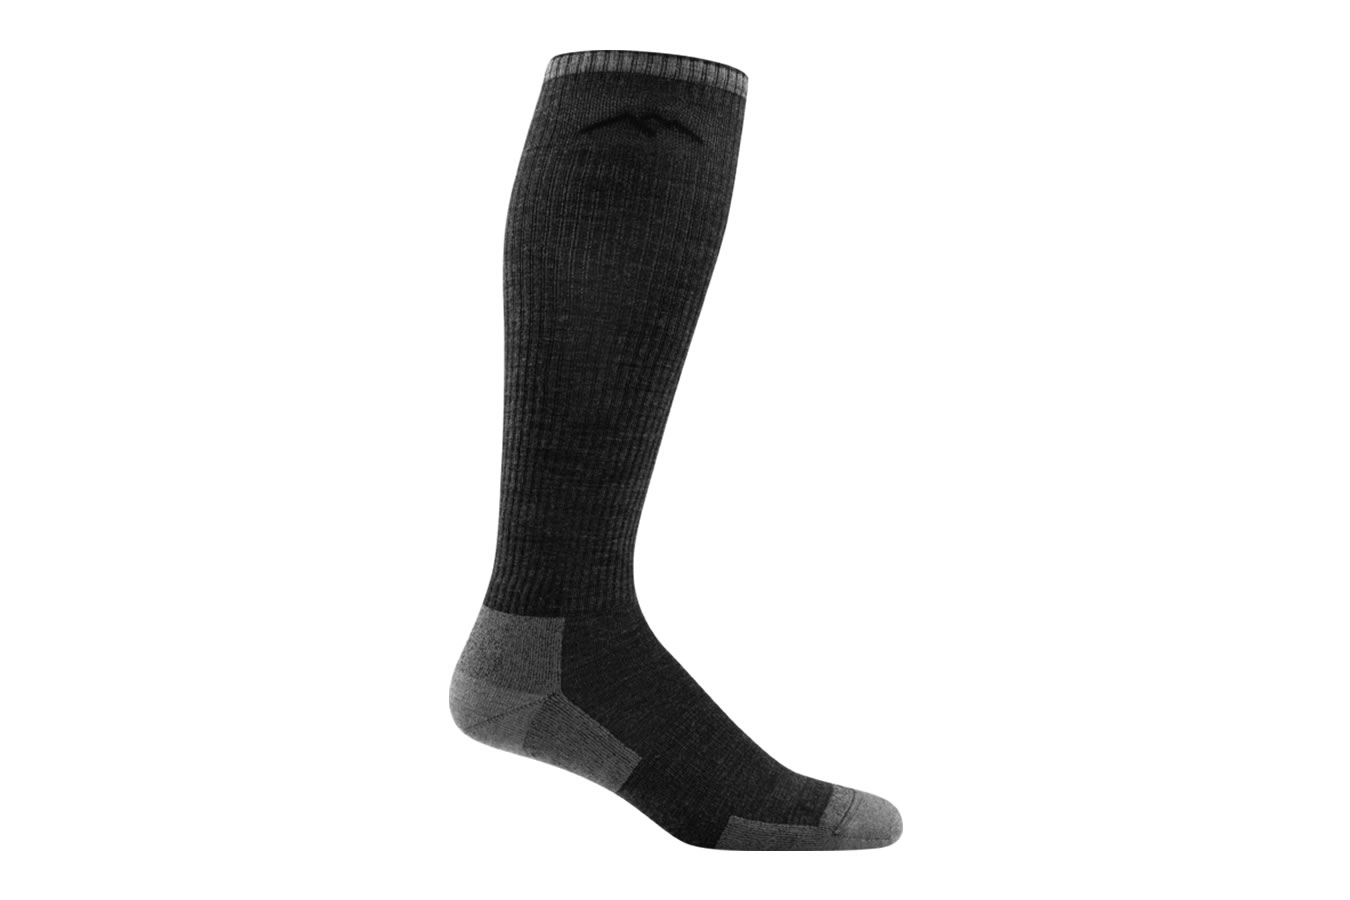 Darn Tough Vermont Westerner Over the Calf Light Cushion Sock | Vance